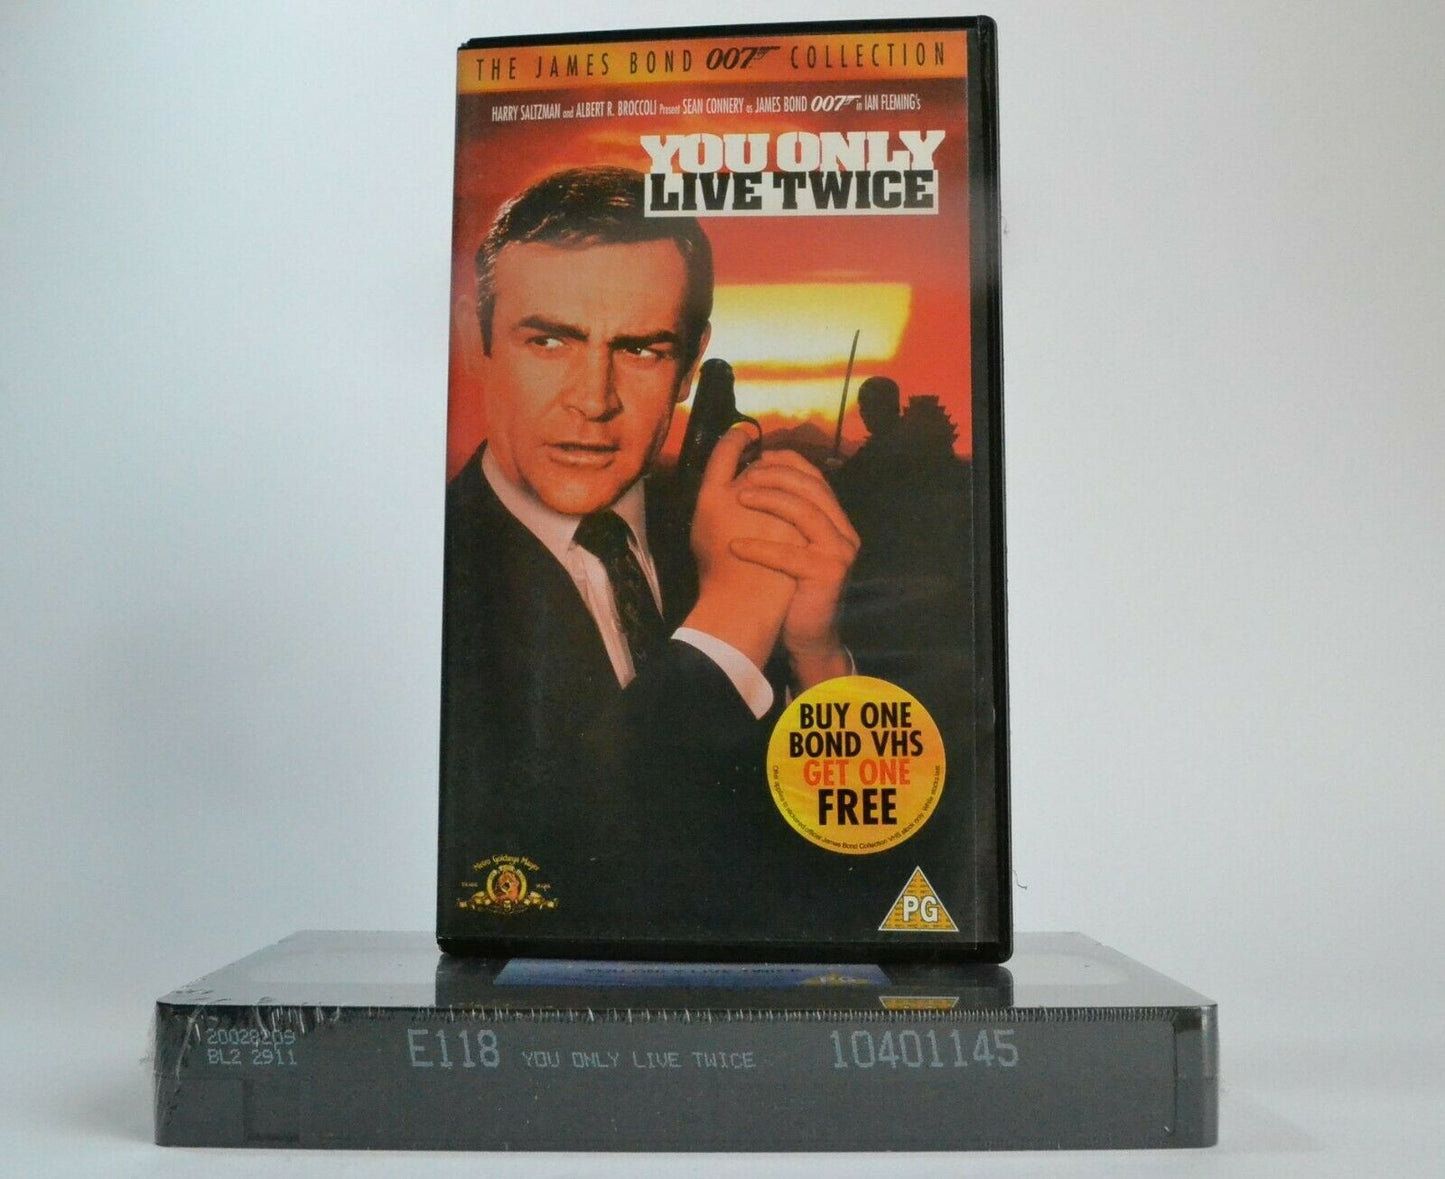 You Only Live Twice (1967); [James Bond Collection] - <Brand New Sealed> - VHS-